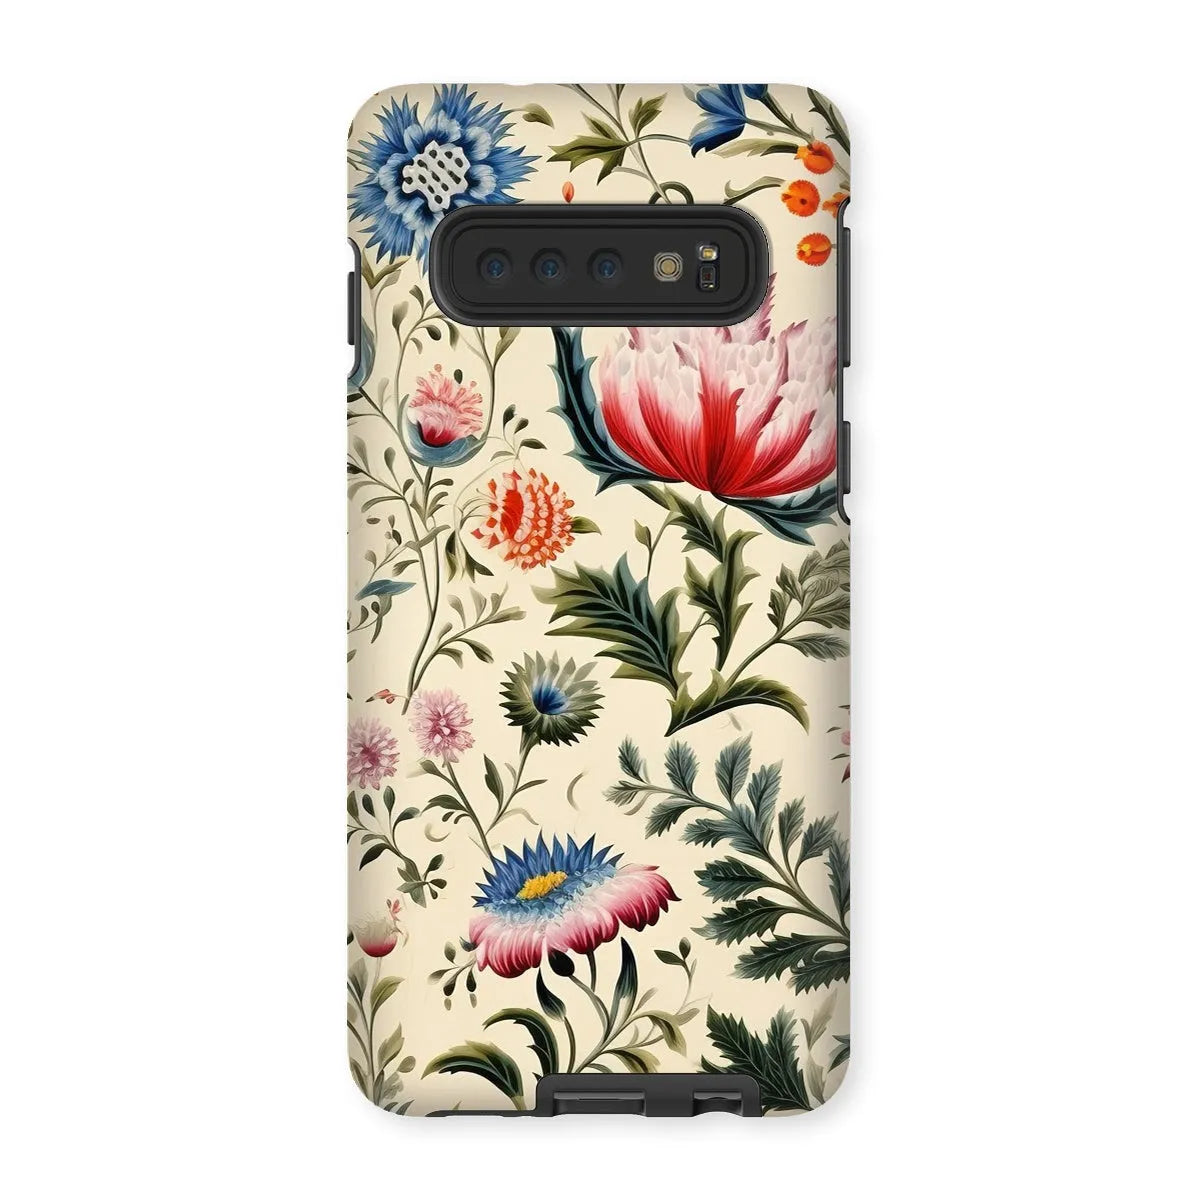 Wildflower Hoopla - Floral Garden Aesthetic Phone Case - Samsung Galaxy S10 / Matte - Mobile Phone Cases - Aesthetic Art